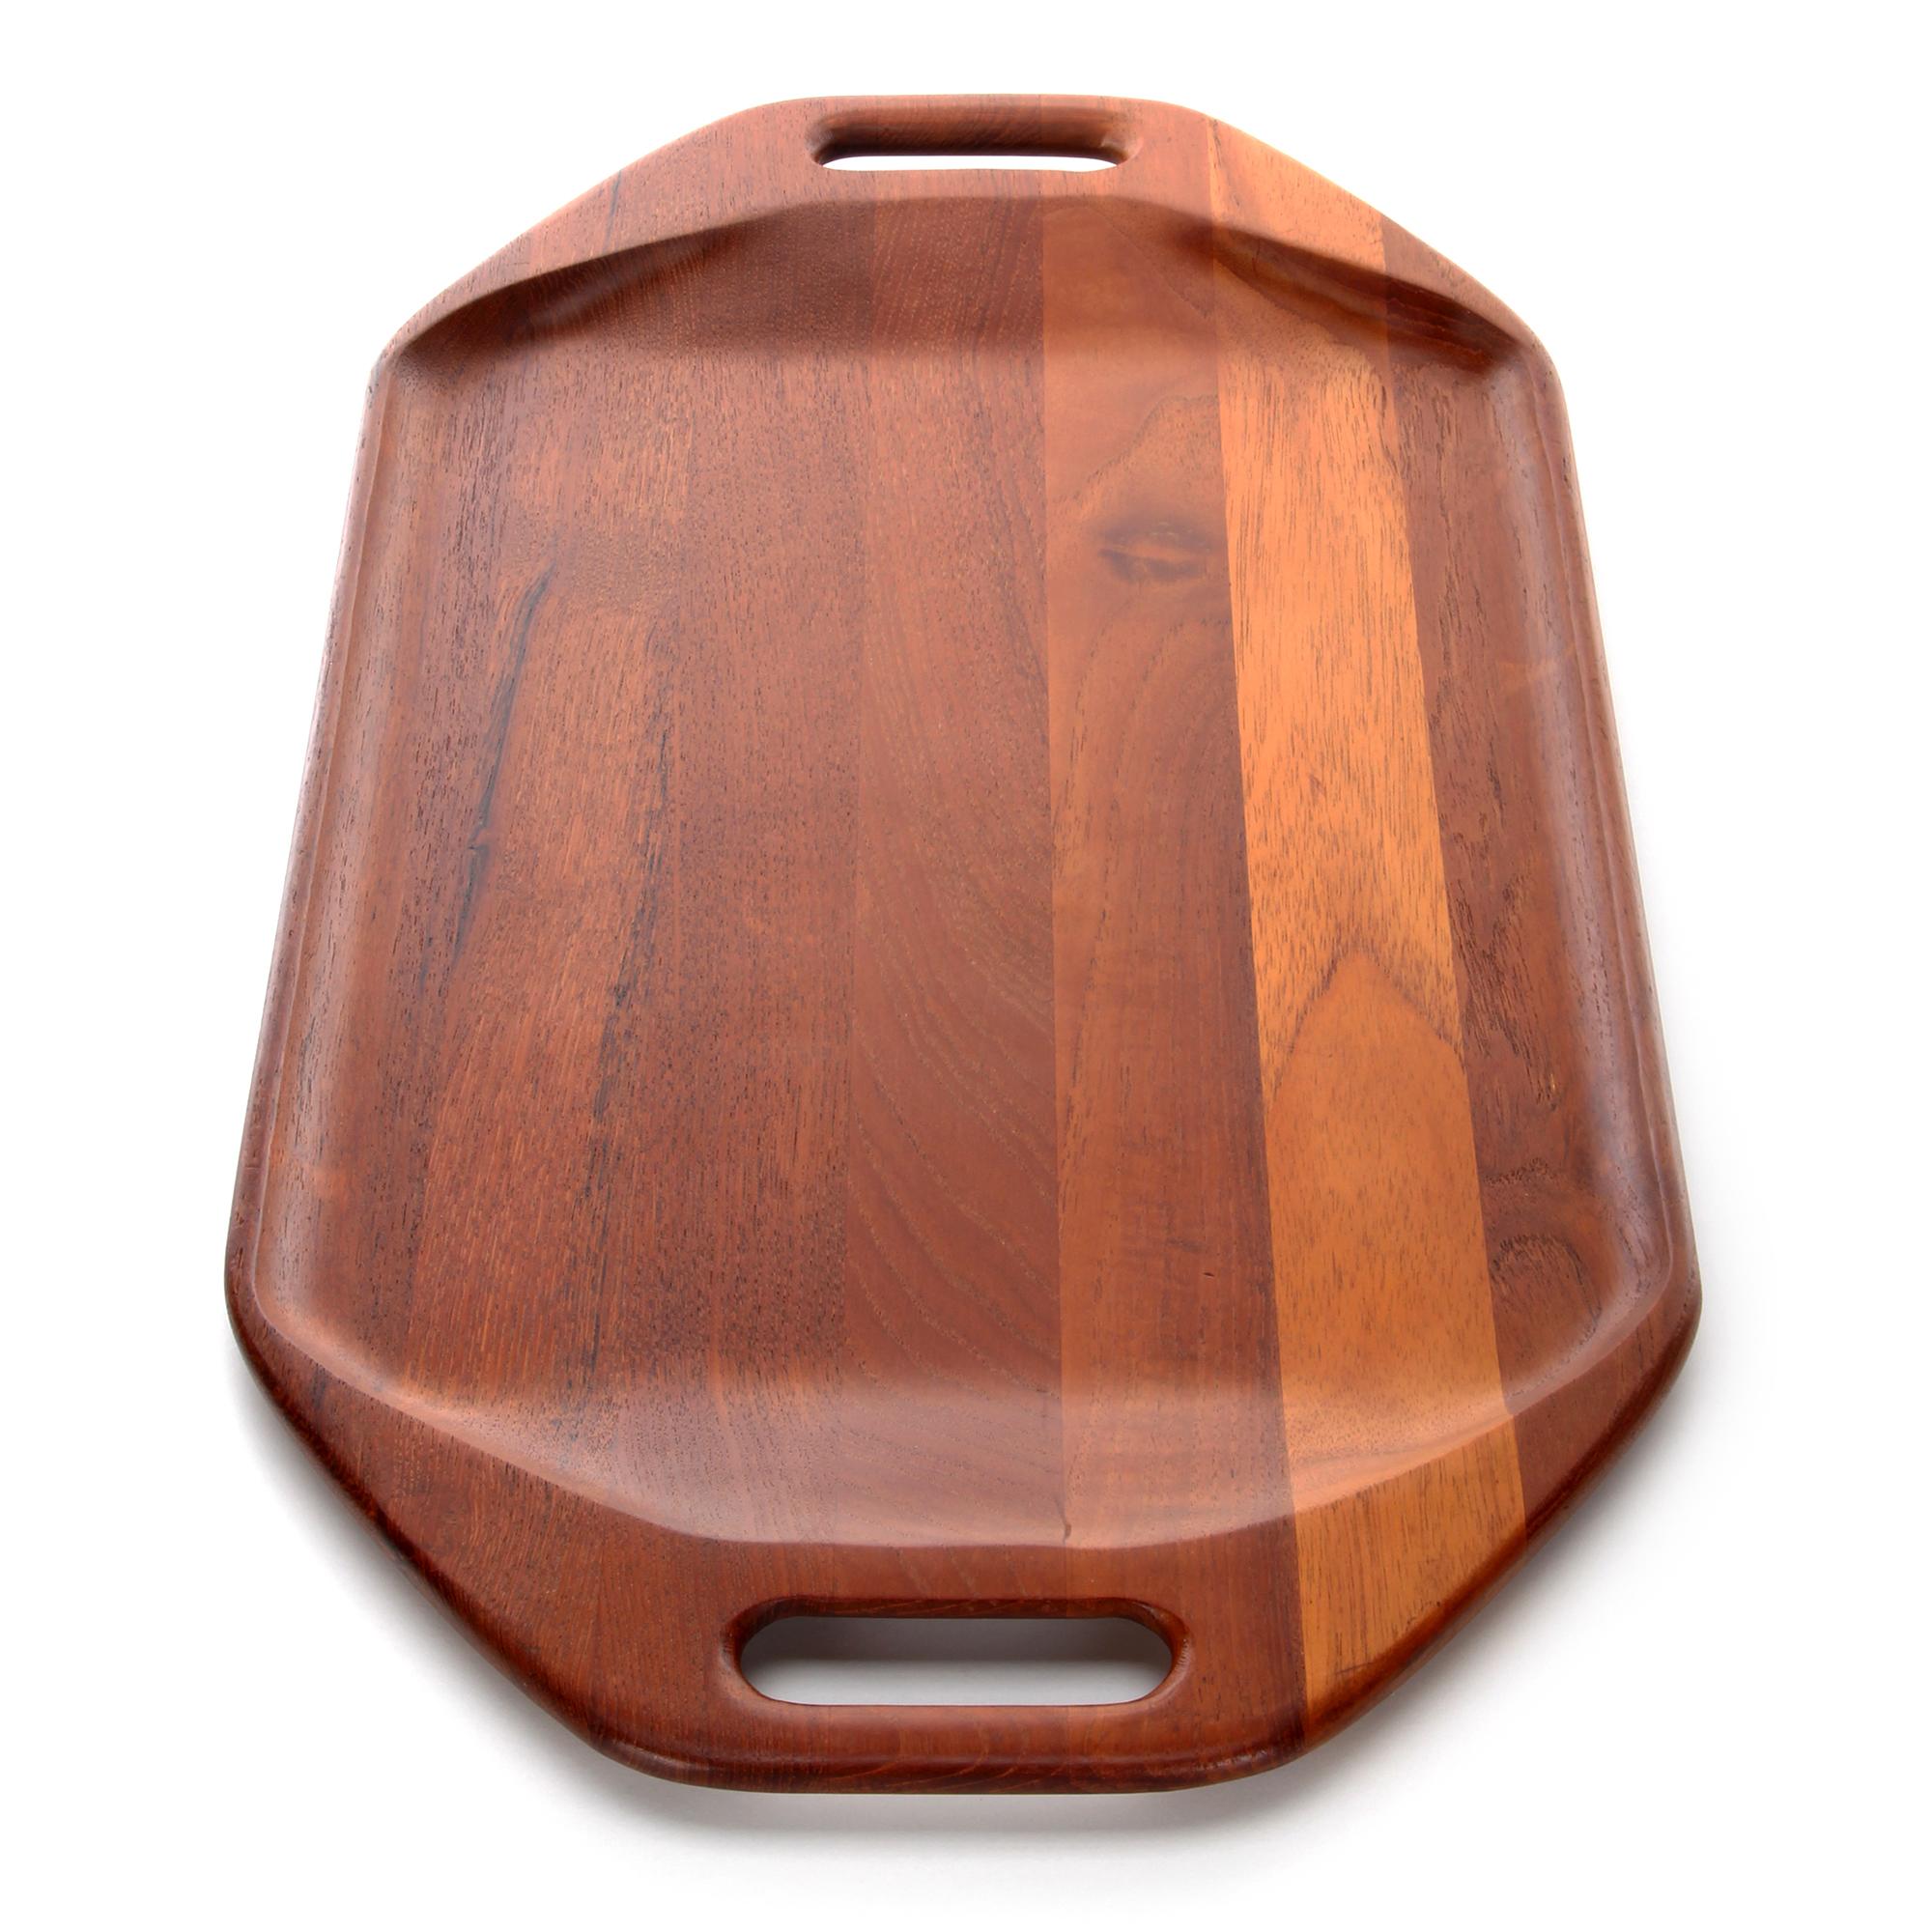 Mid-20th Century Teak Tray by Digsmed 1964, Large Danish Modern Severing Tray